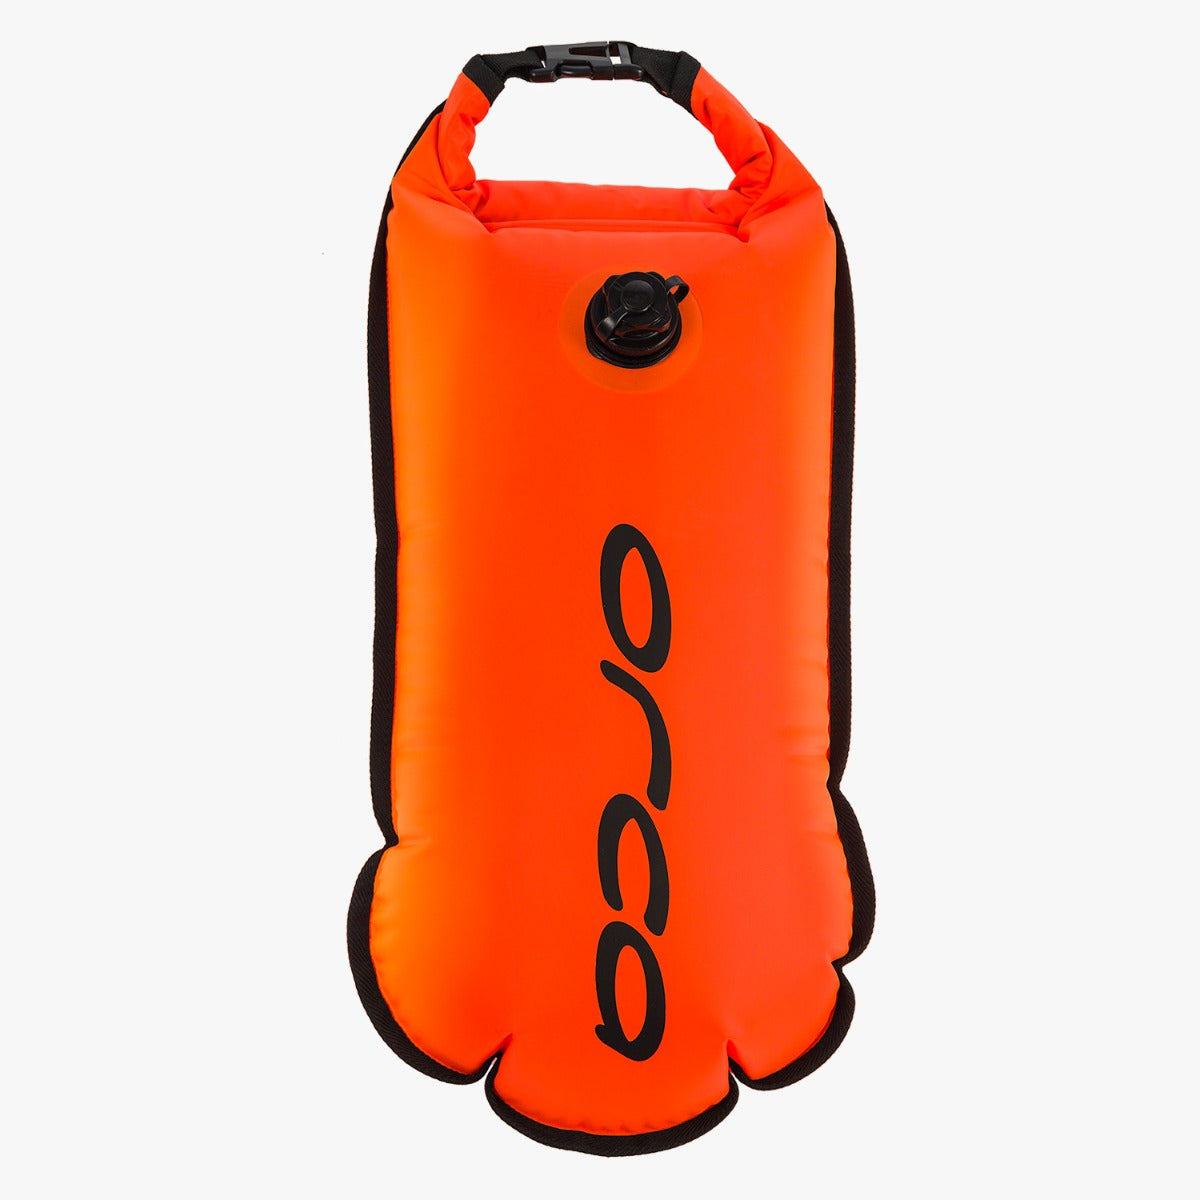 Orca Openwater Safety Buoy